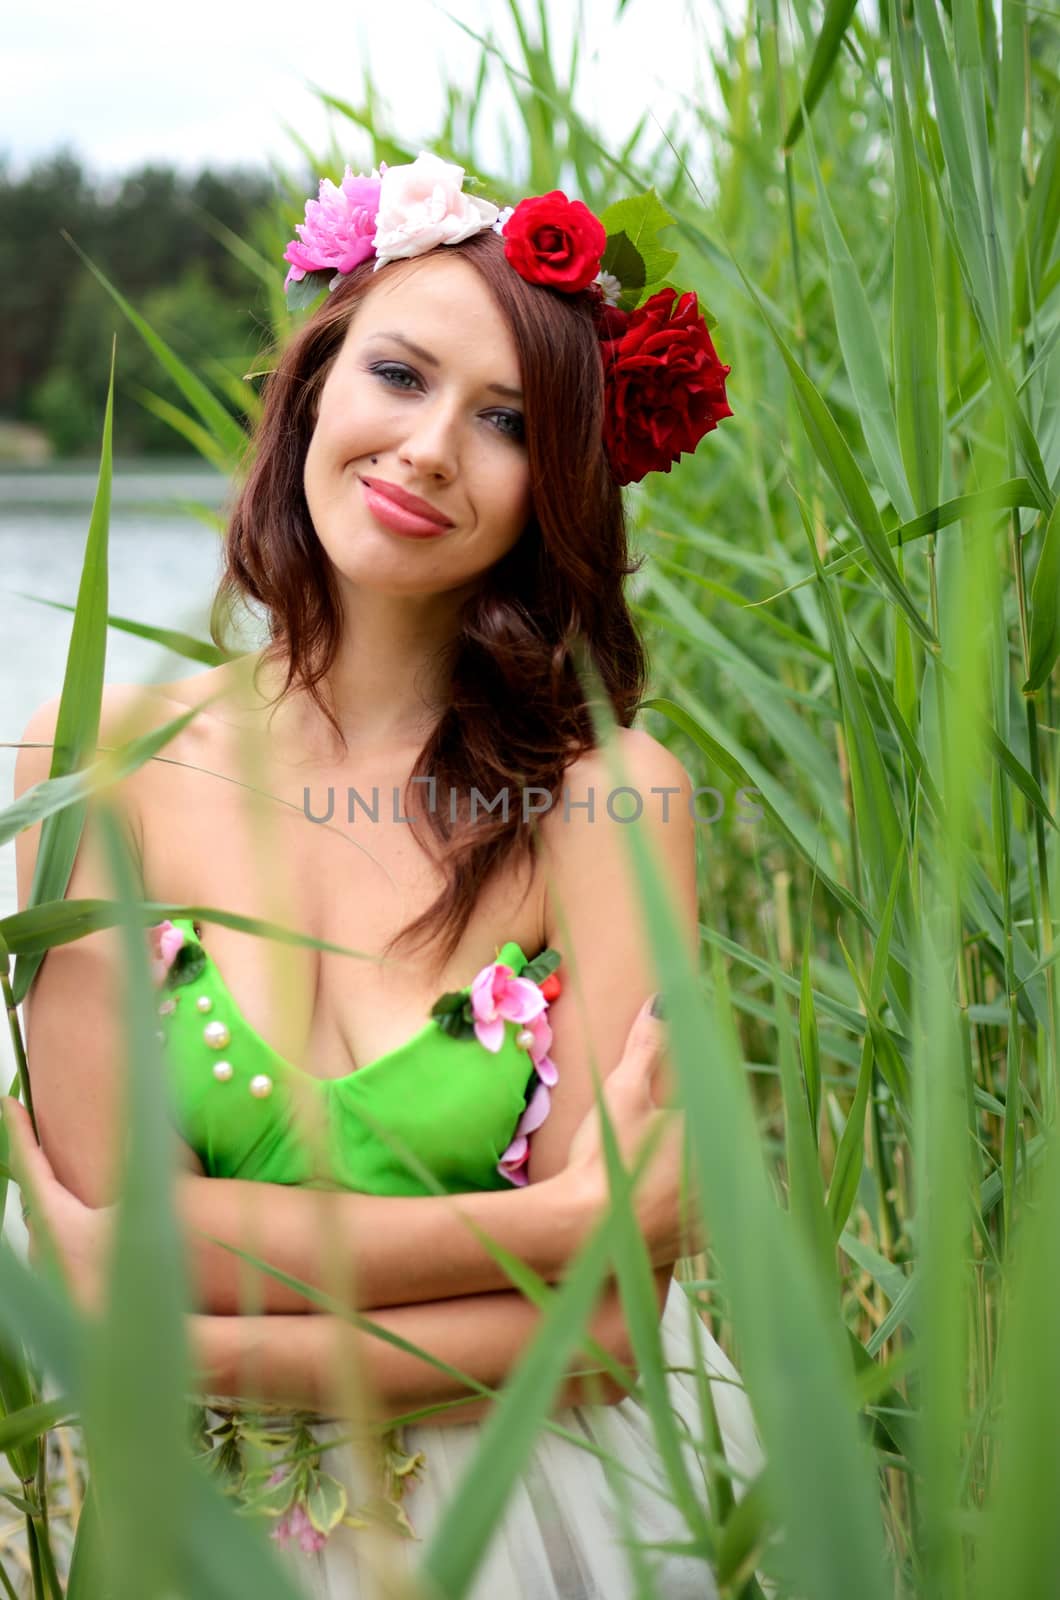 Portrait of female model with chestnut hairs, wearing wreath made of mixed flowers. Woman posing near lake surrounded by reeds.  